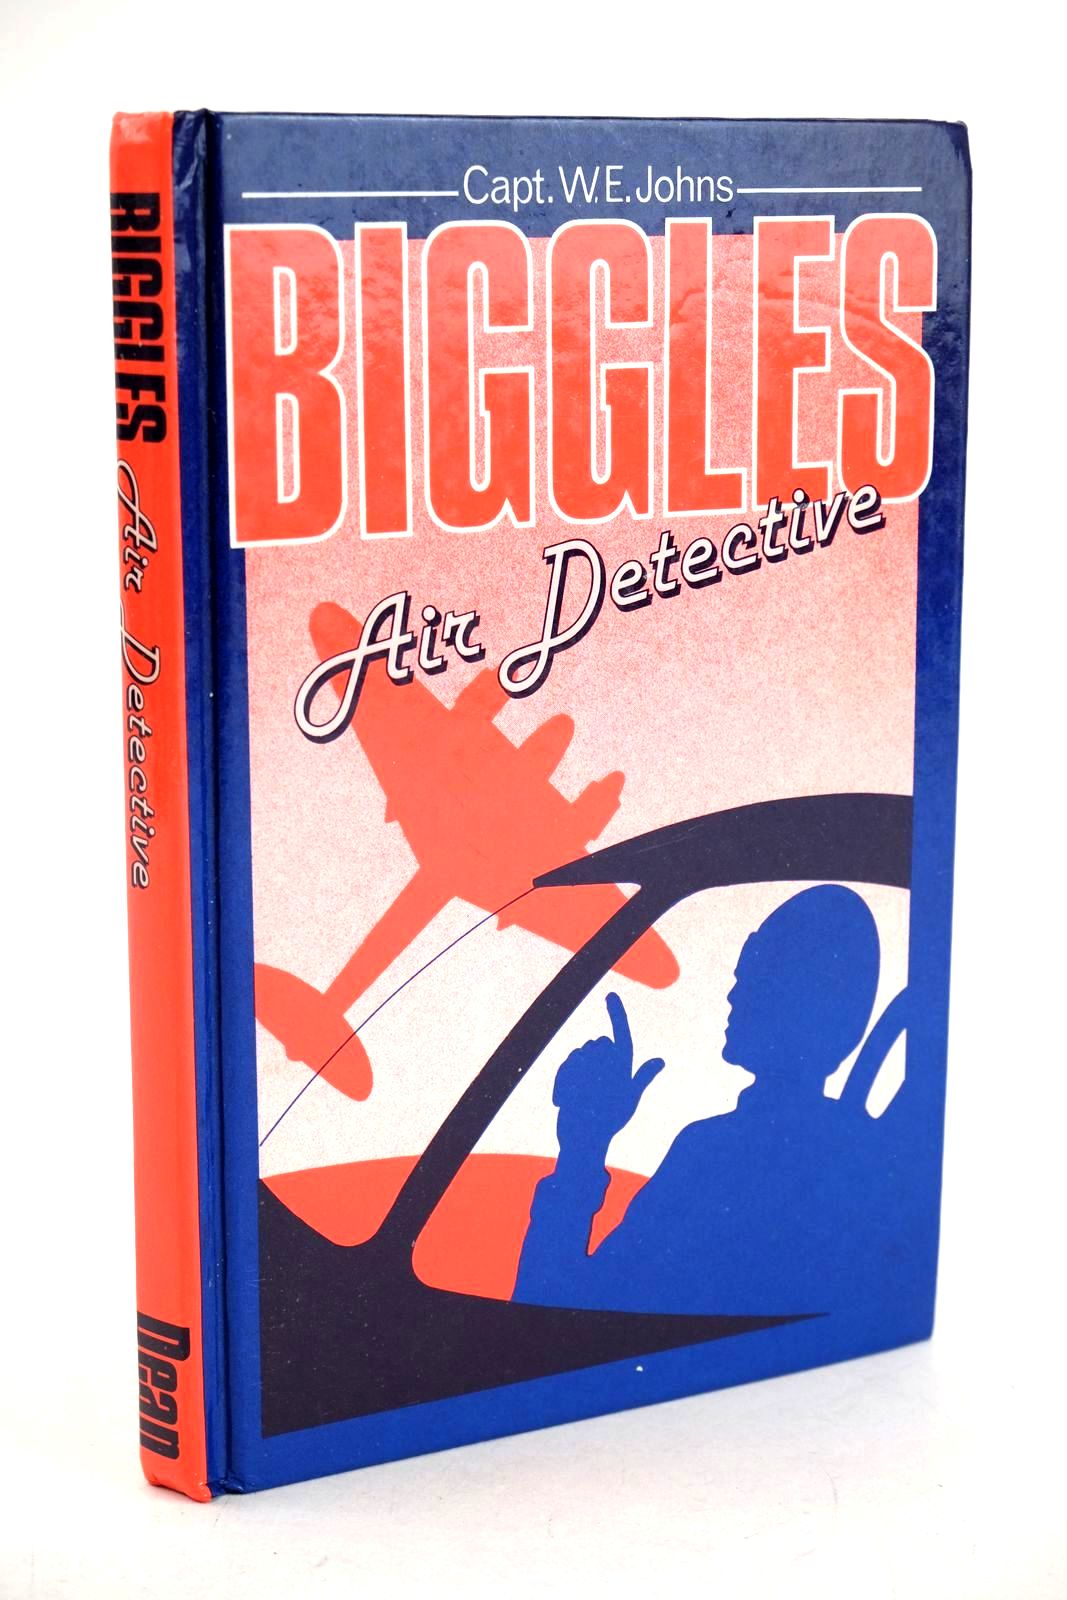 Photo of BIGGLES AIR DETECTIVE written by Johns, W.E. published by Deans International Publishing (STOCK CODE: 1326636)  for sale by Stella & Rose's Books